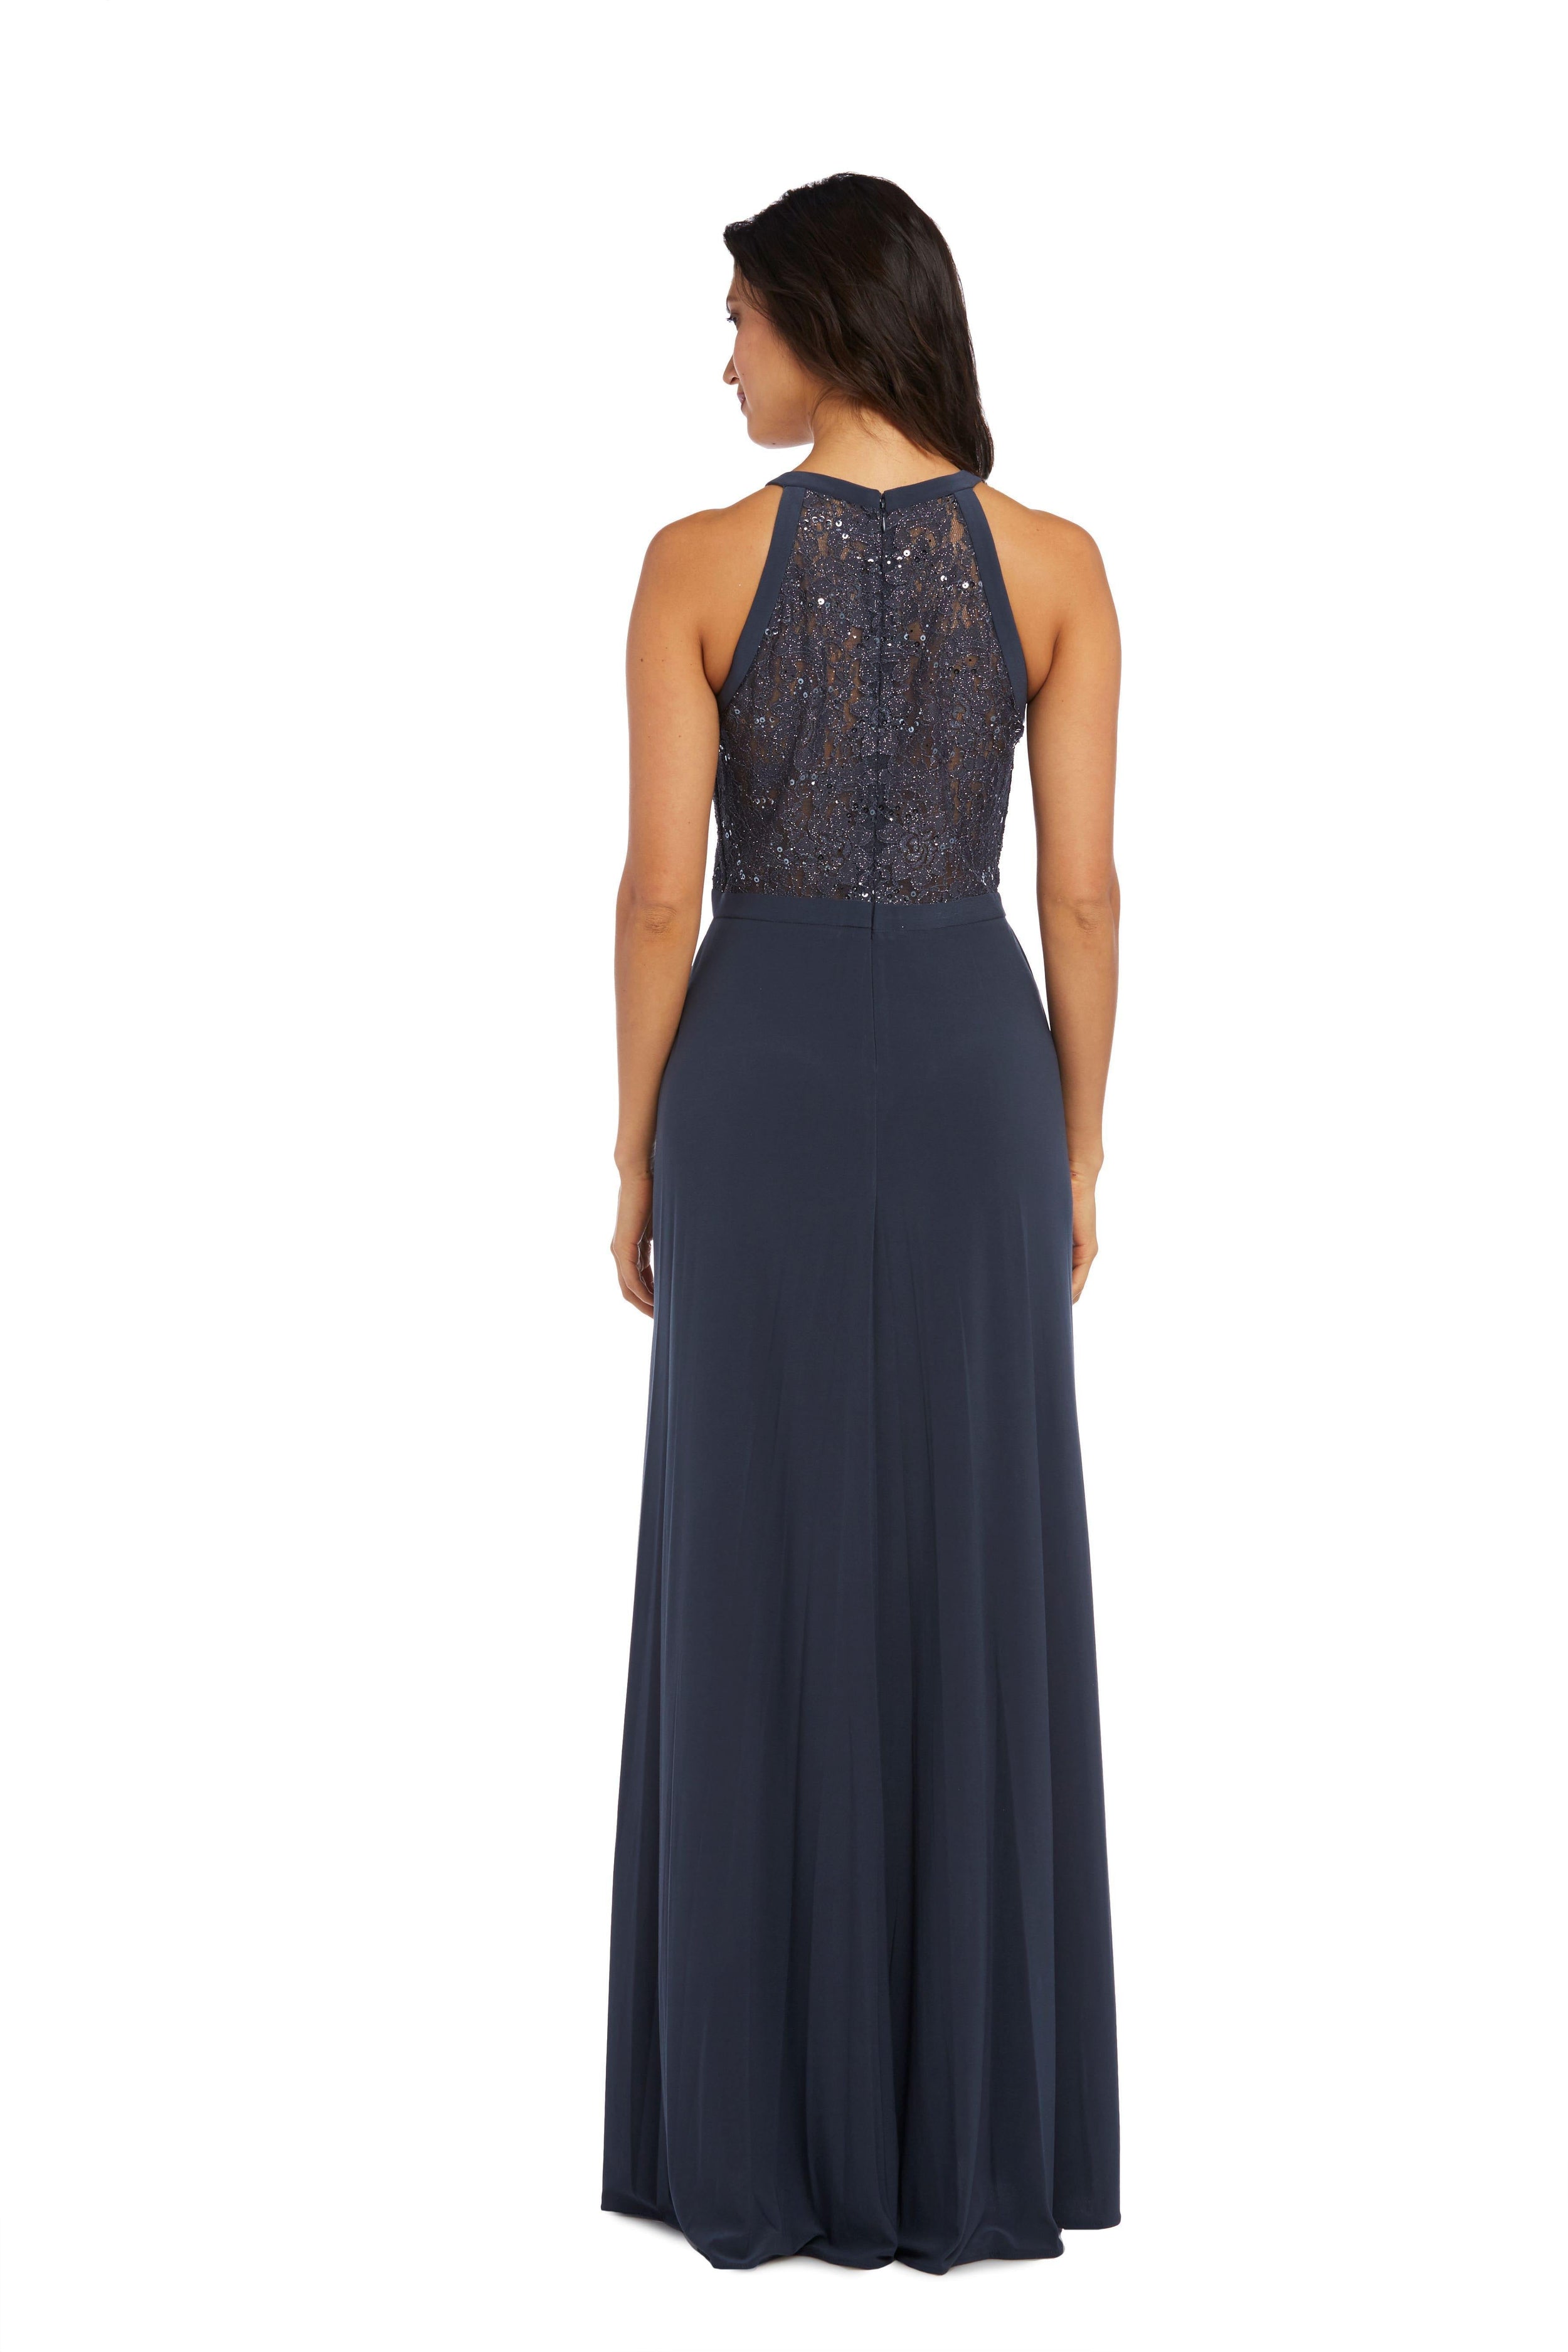 Nightway Long Formal Dress 21434 - The Dress Outlet